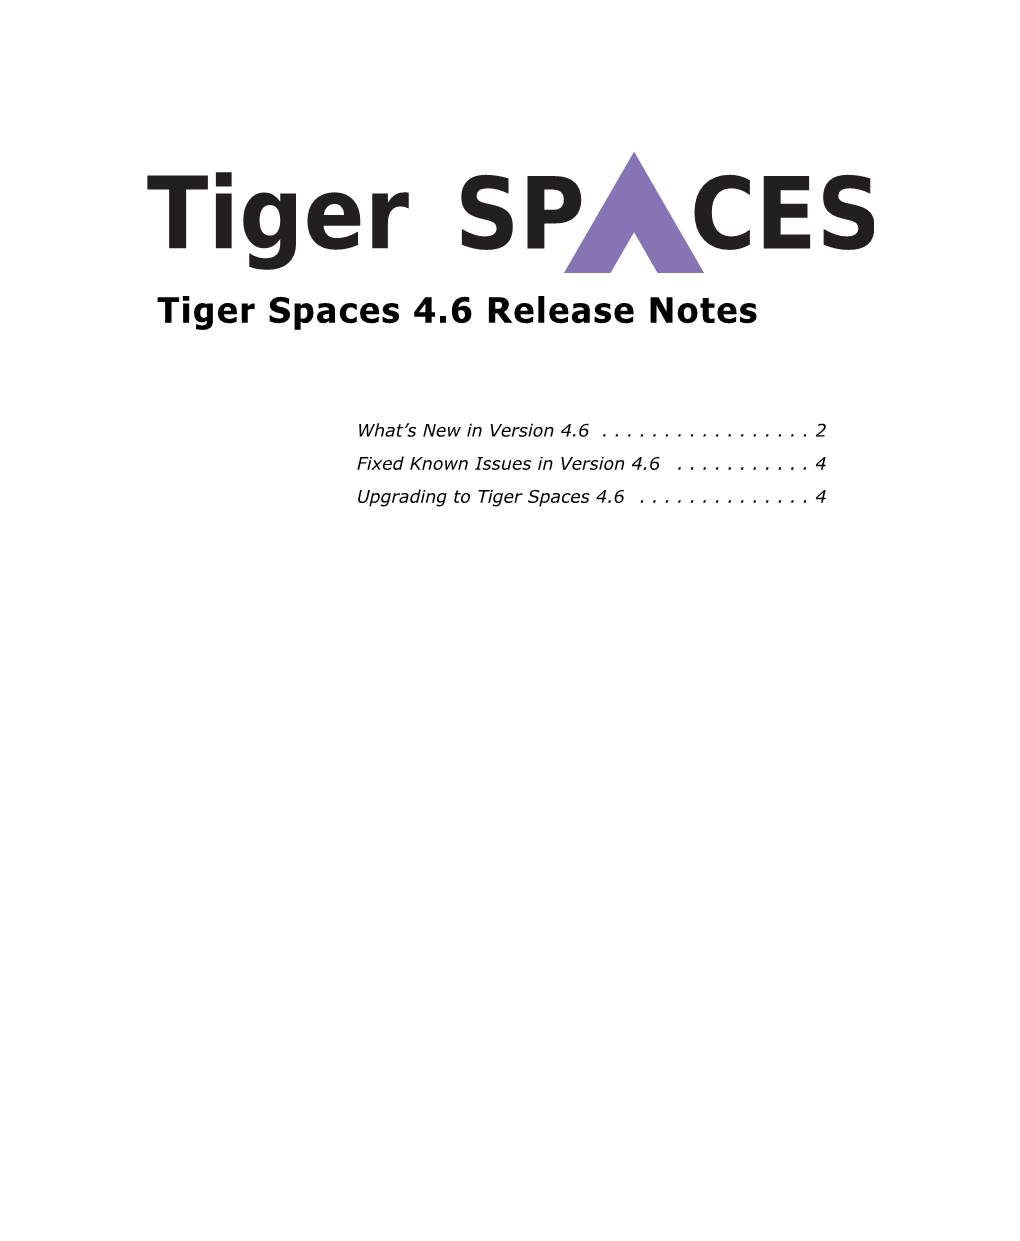 Tiger Spaces 4.6 Release Notes